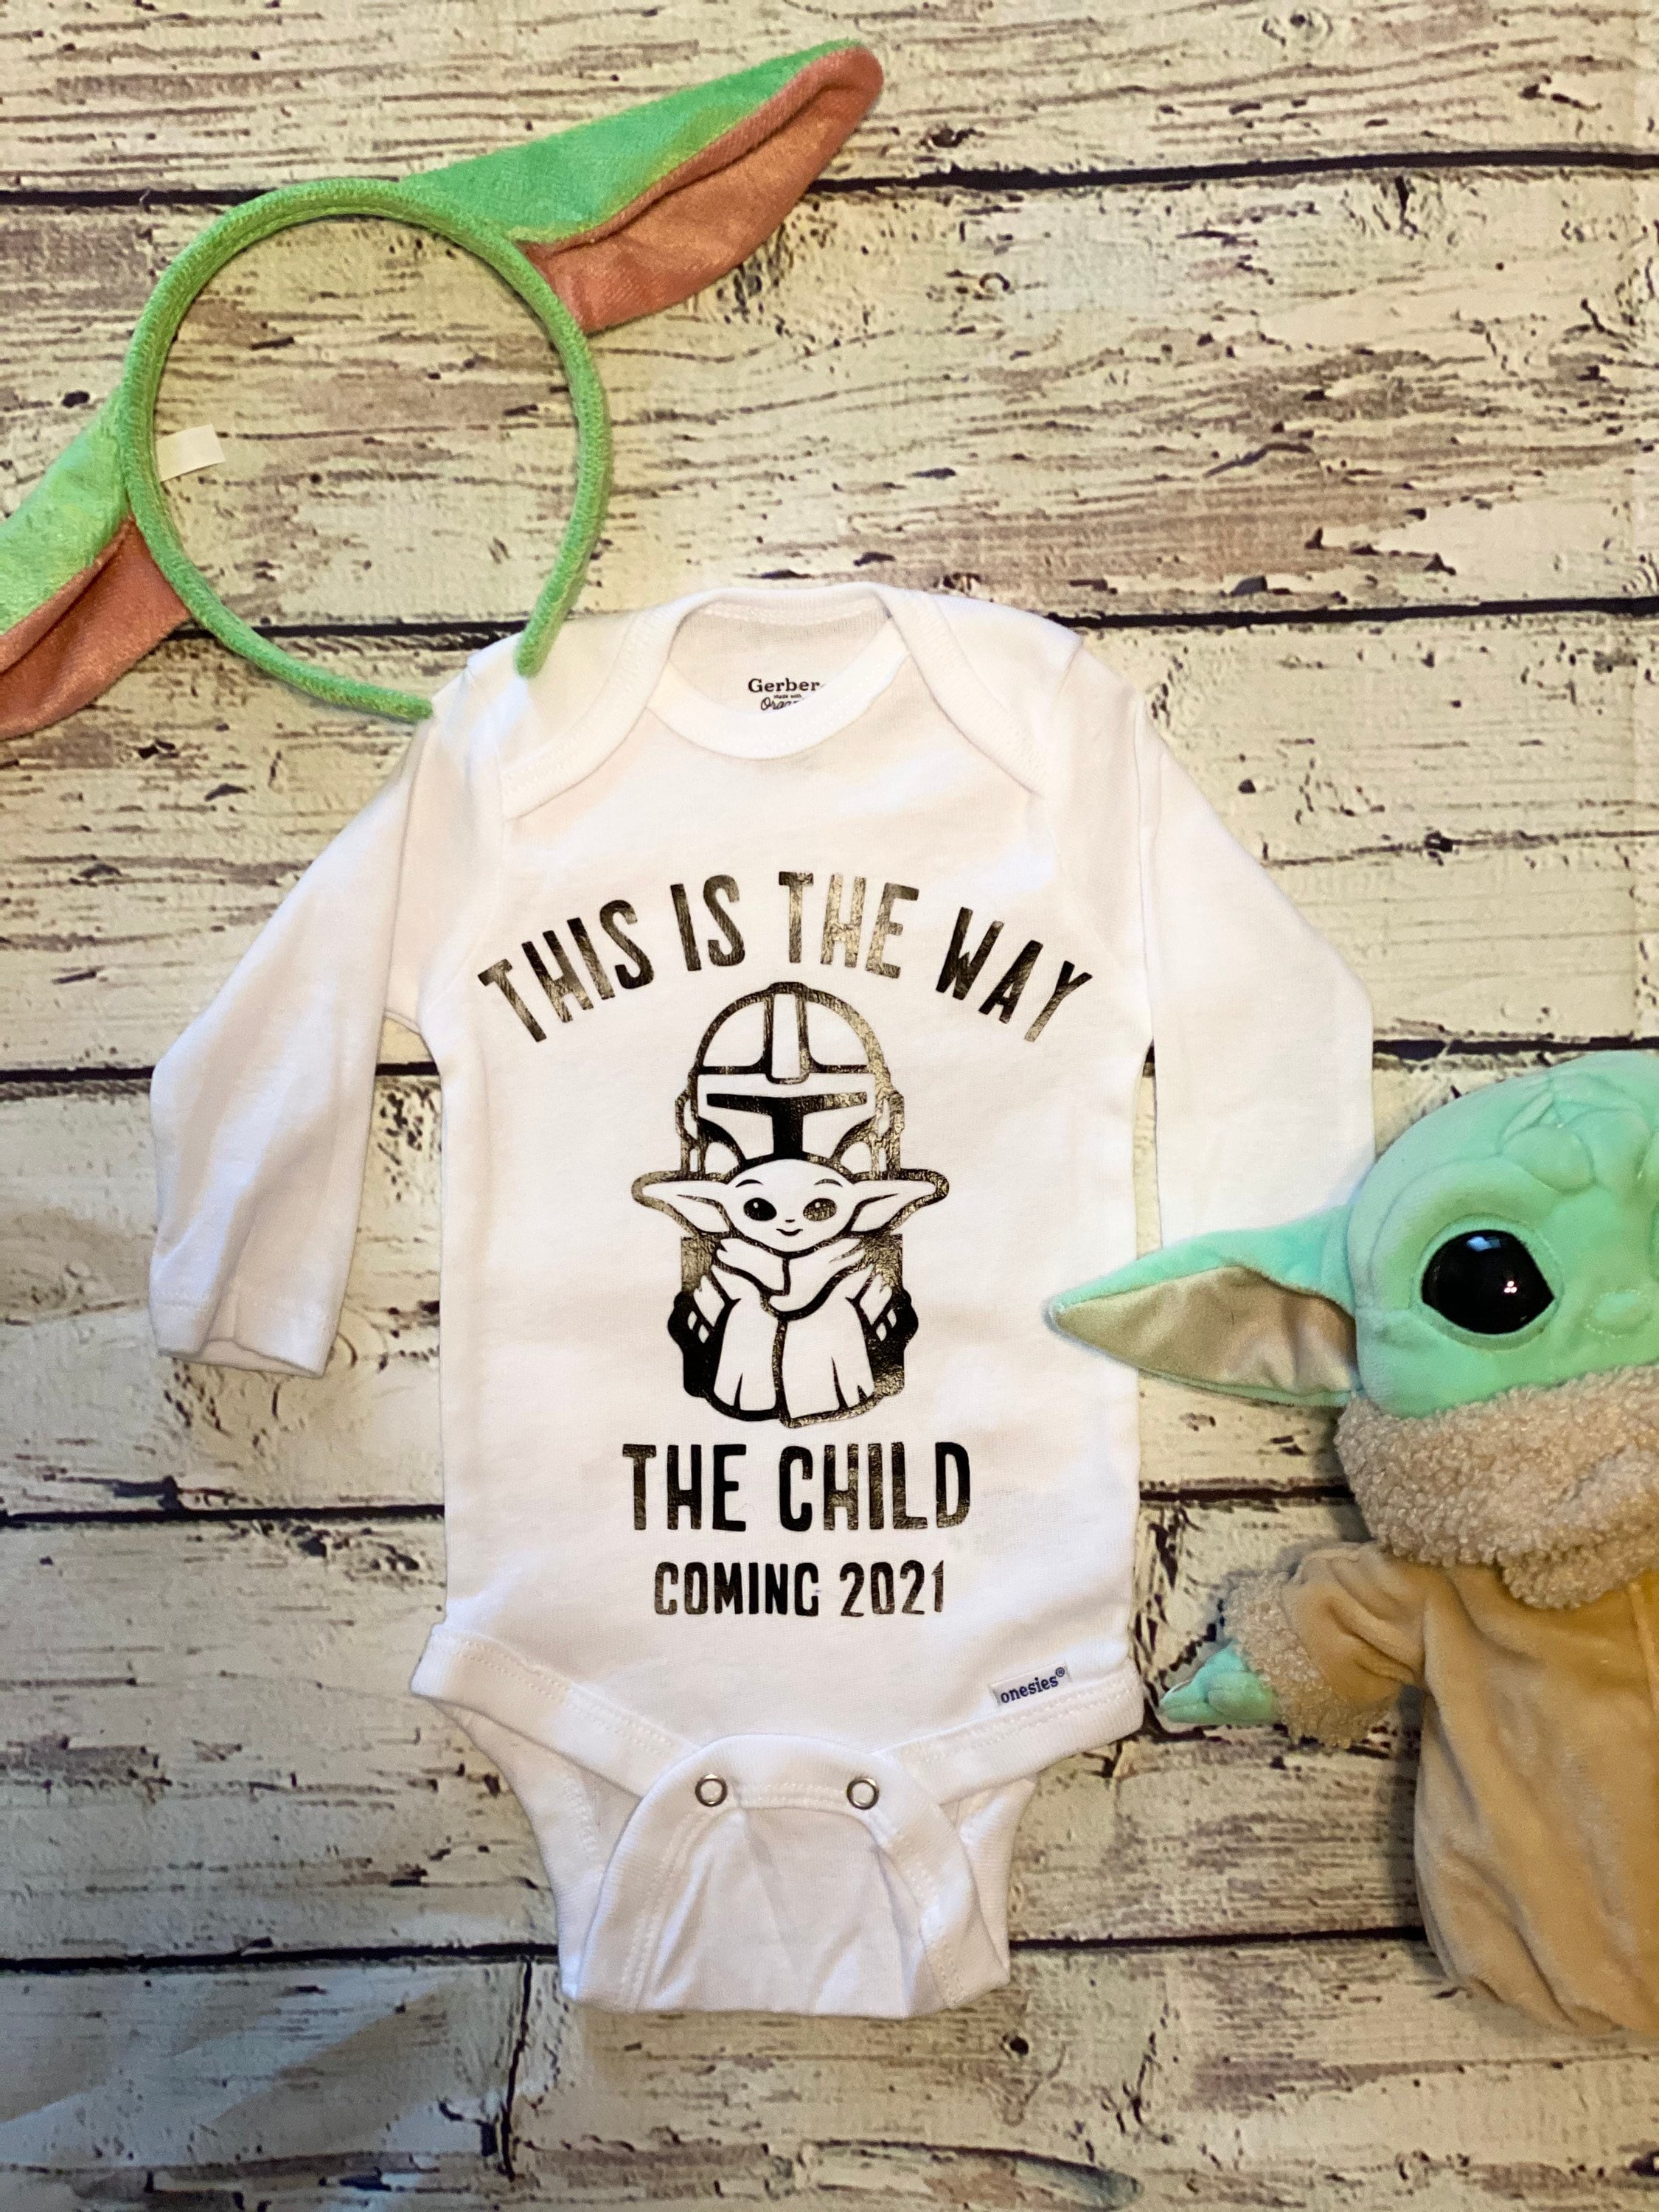 Disney announces The Mandalorian and Baby Yoda are coming to the